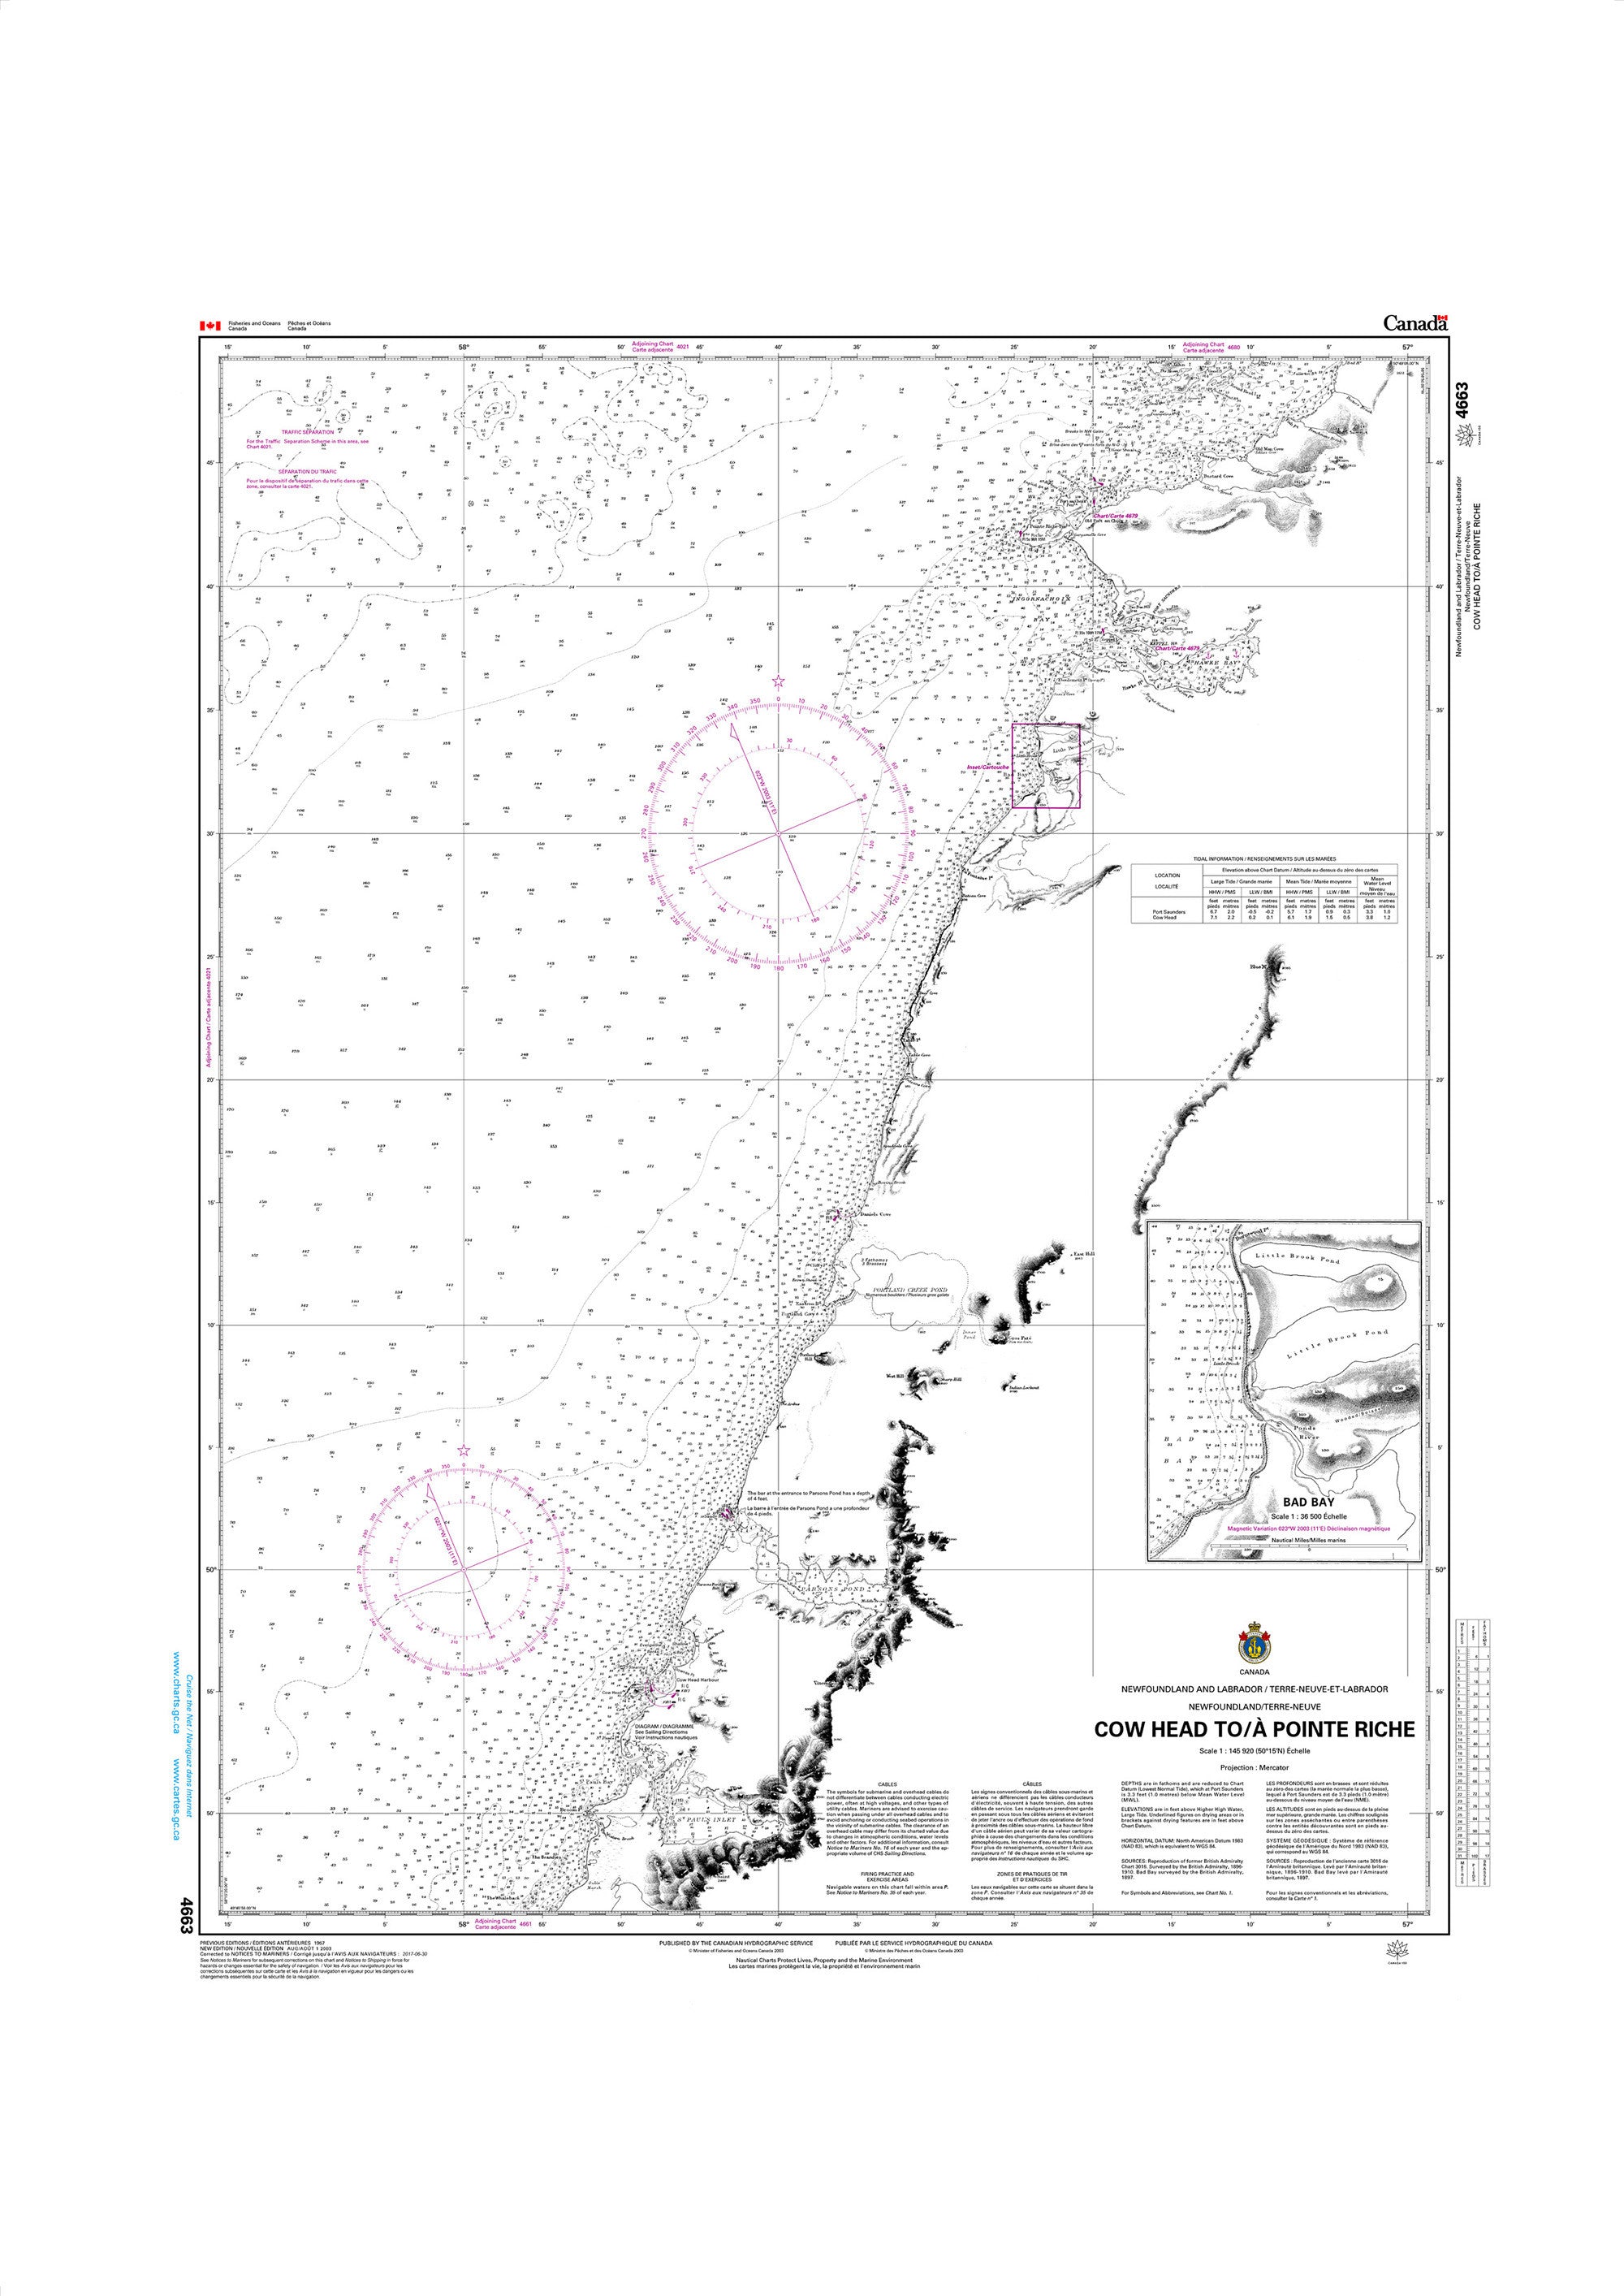 Canadian Hydrographic Service Nautical Chart CHS4663: Cow Head to/à Pointe Riche